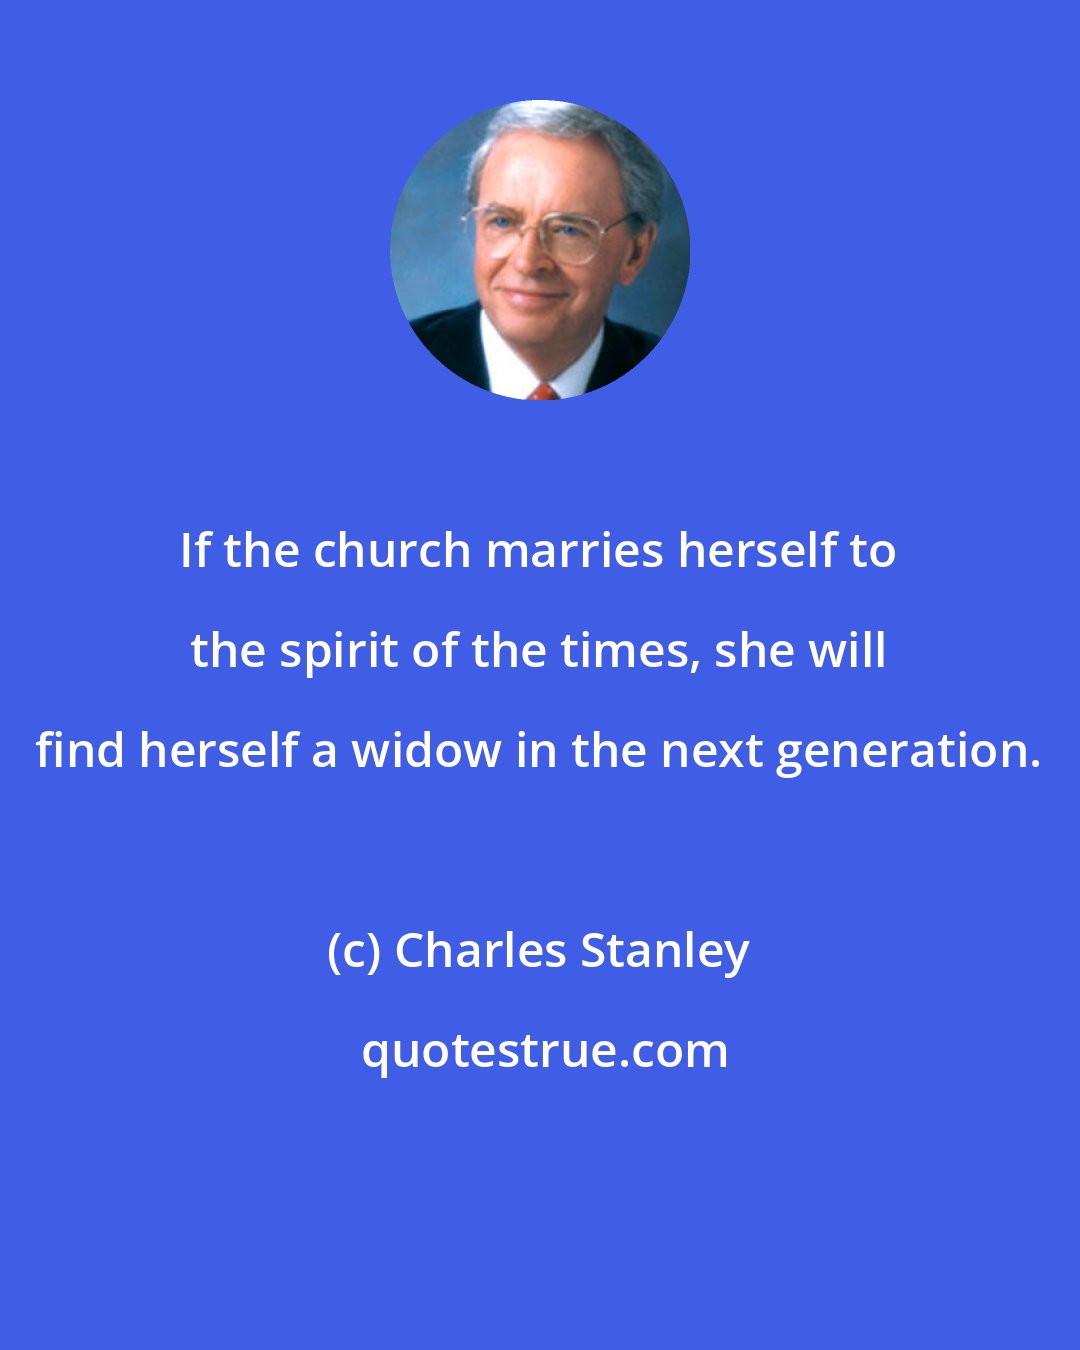 Charles Stanley: If the church marries herself to the spirit of the times, she will find herself a widow in the next generation.